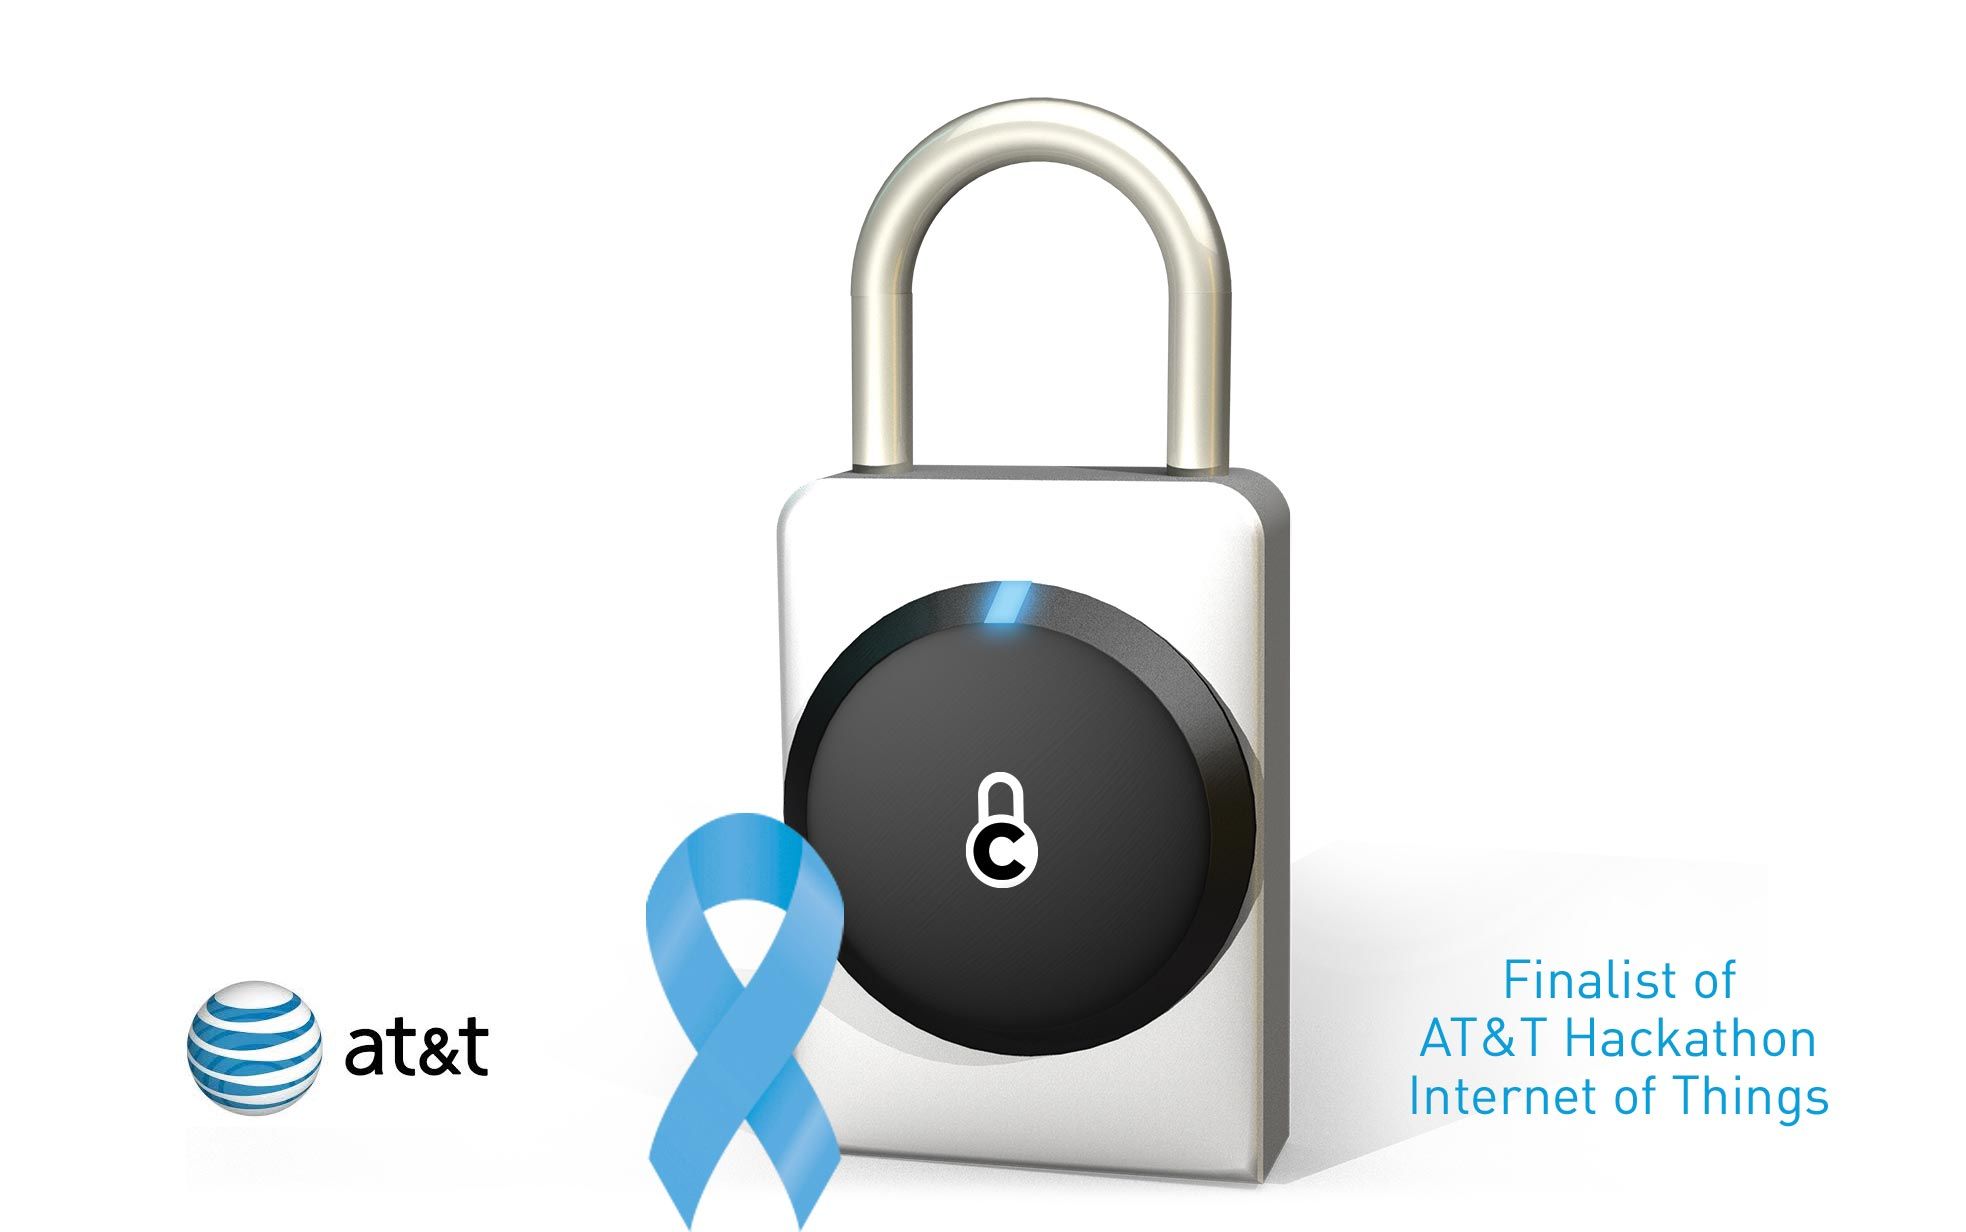 AT&T Finalist Coinlocked Encrypted Private Secure Access